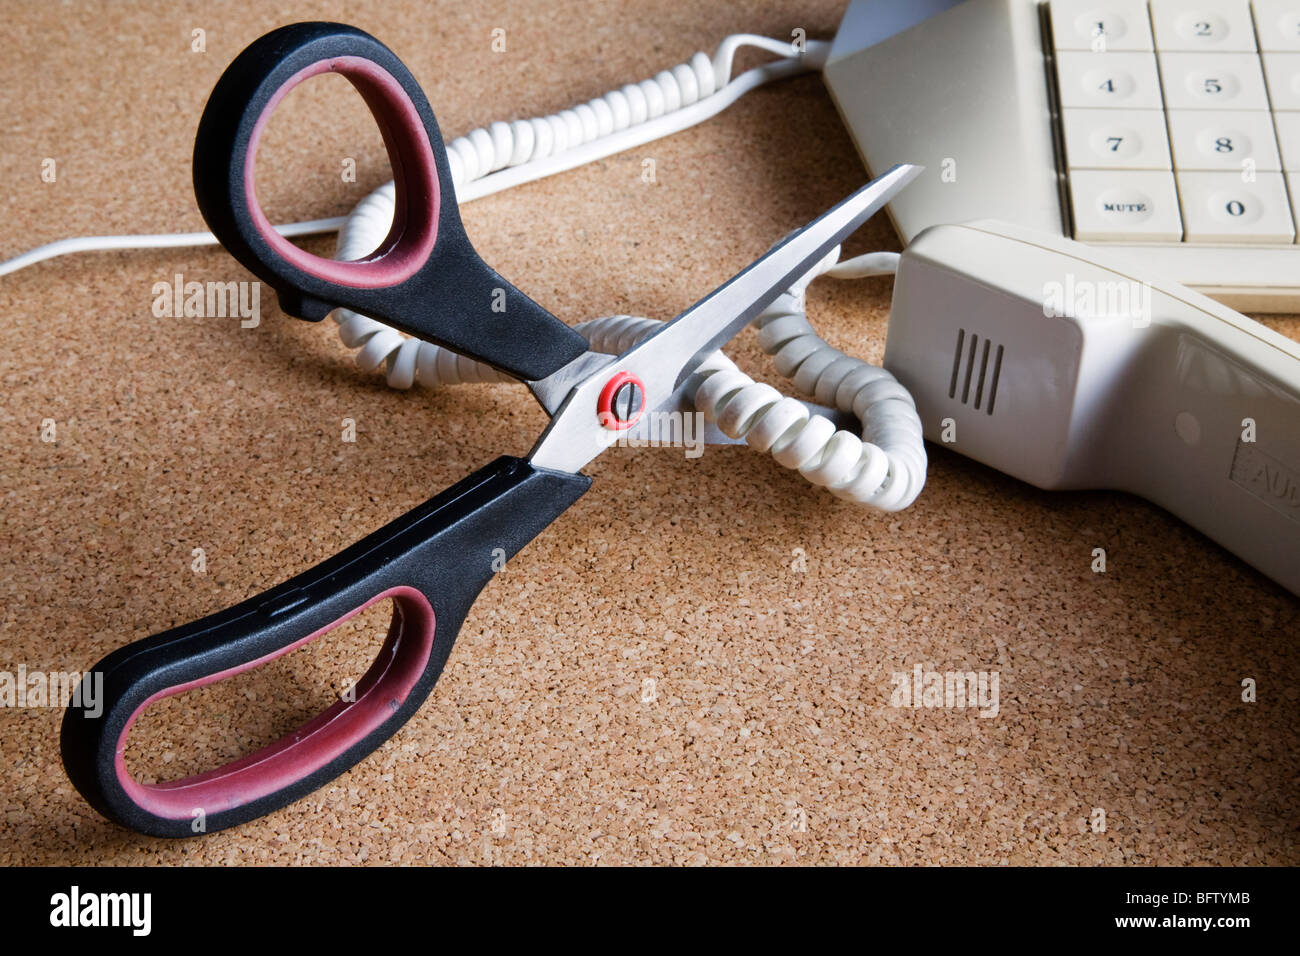 A pair of scissors cutting through a telephone cord. Stock Photo